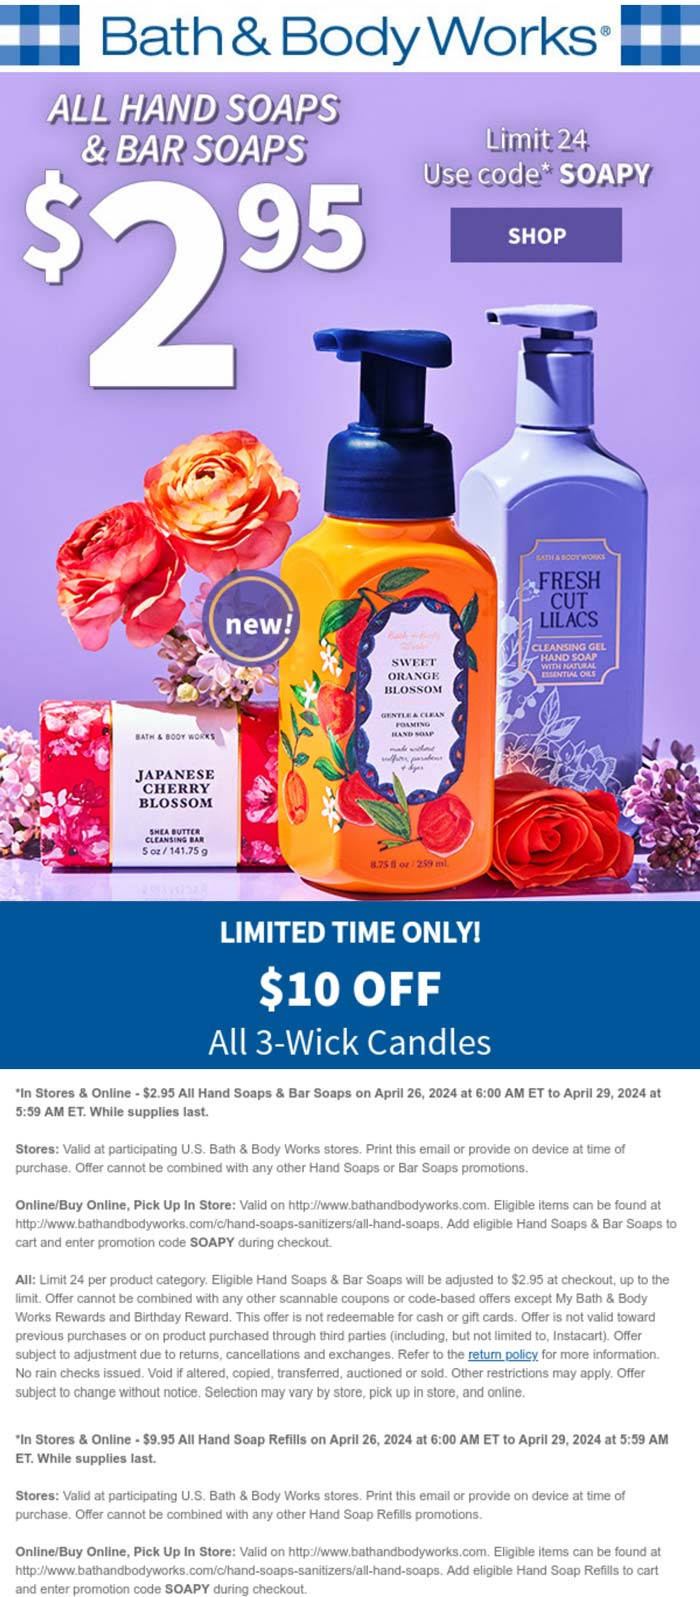 Bath & Body Works stores Coupon  $3 hand soaps at Bath & Body Works, or online via promo code SOAPY #bathbodyworks 